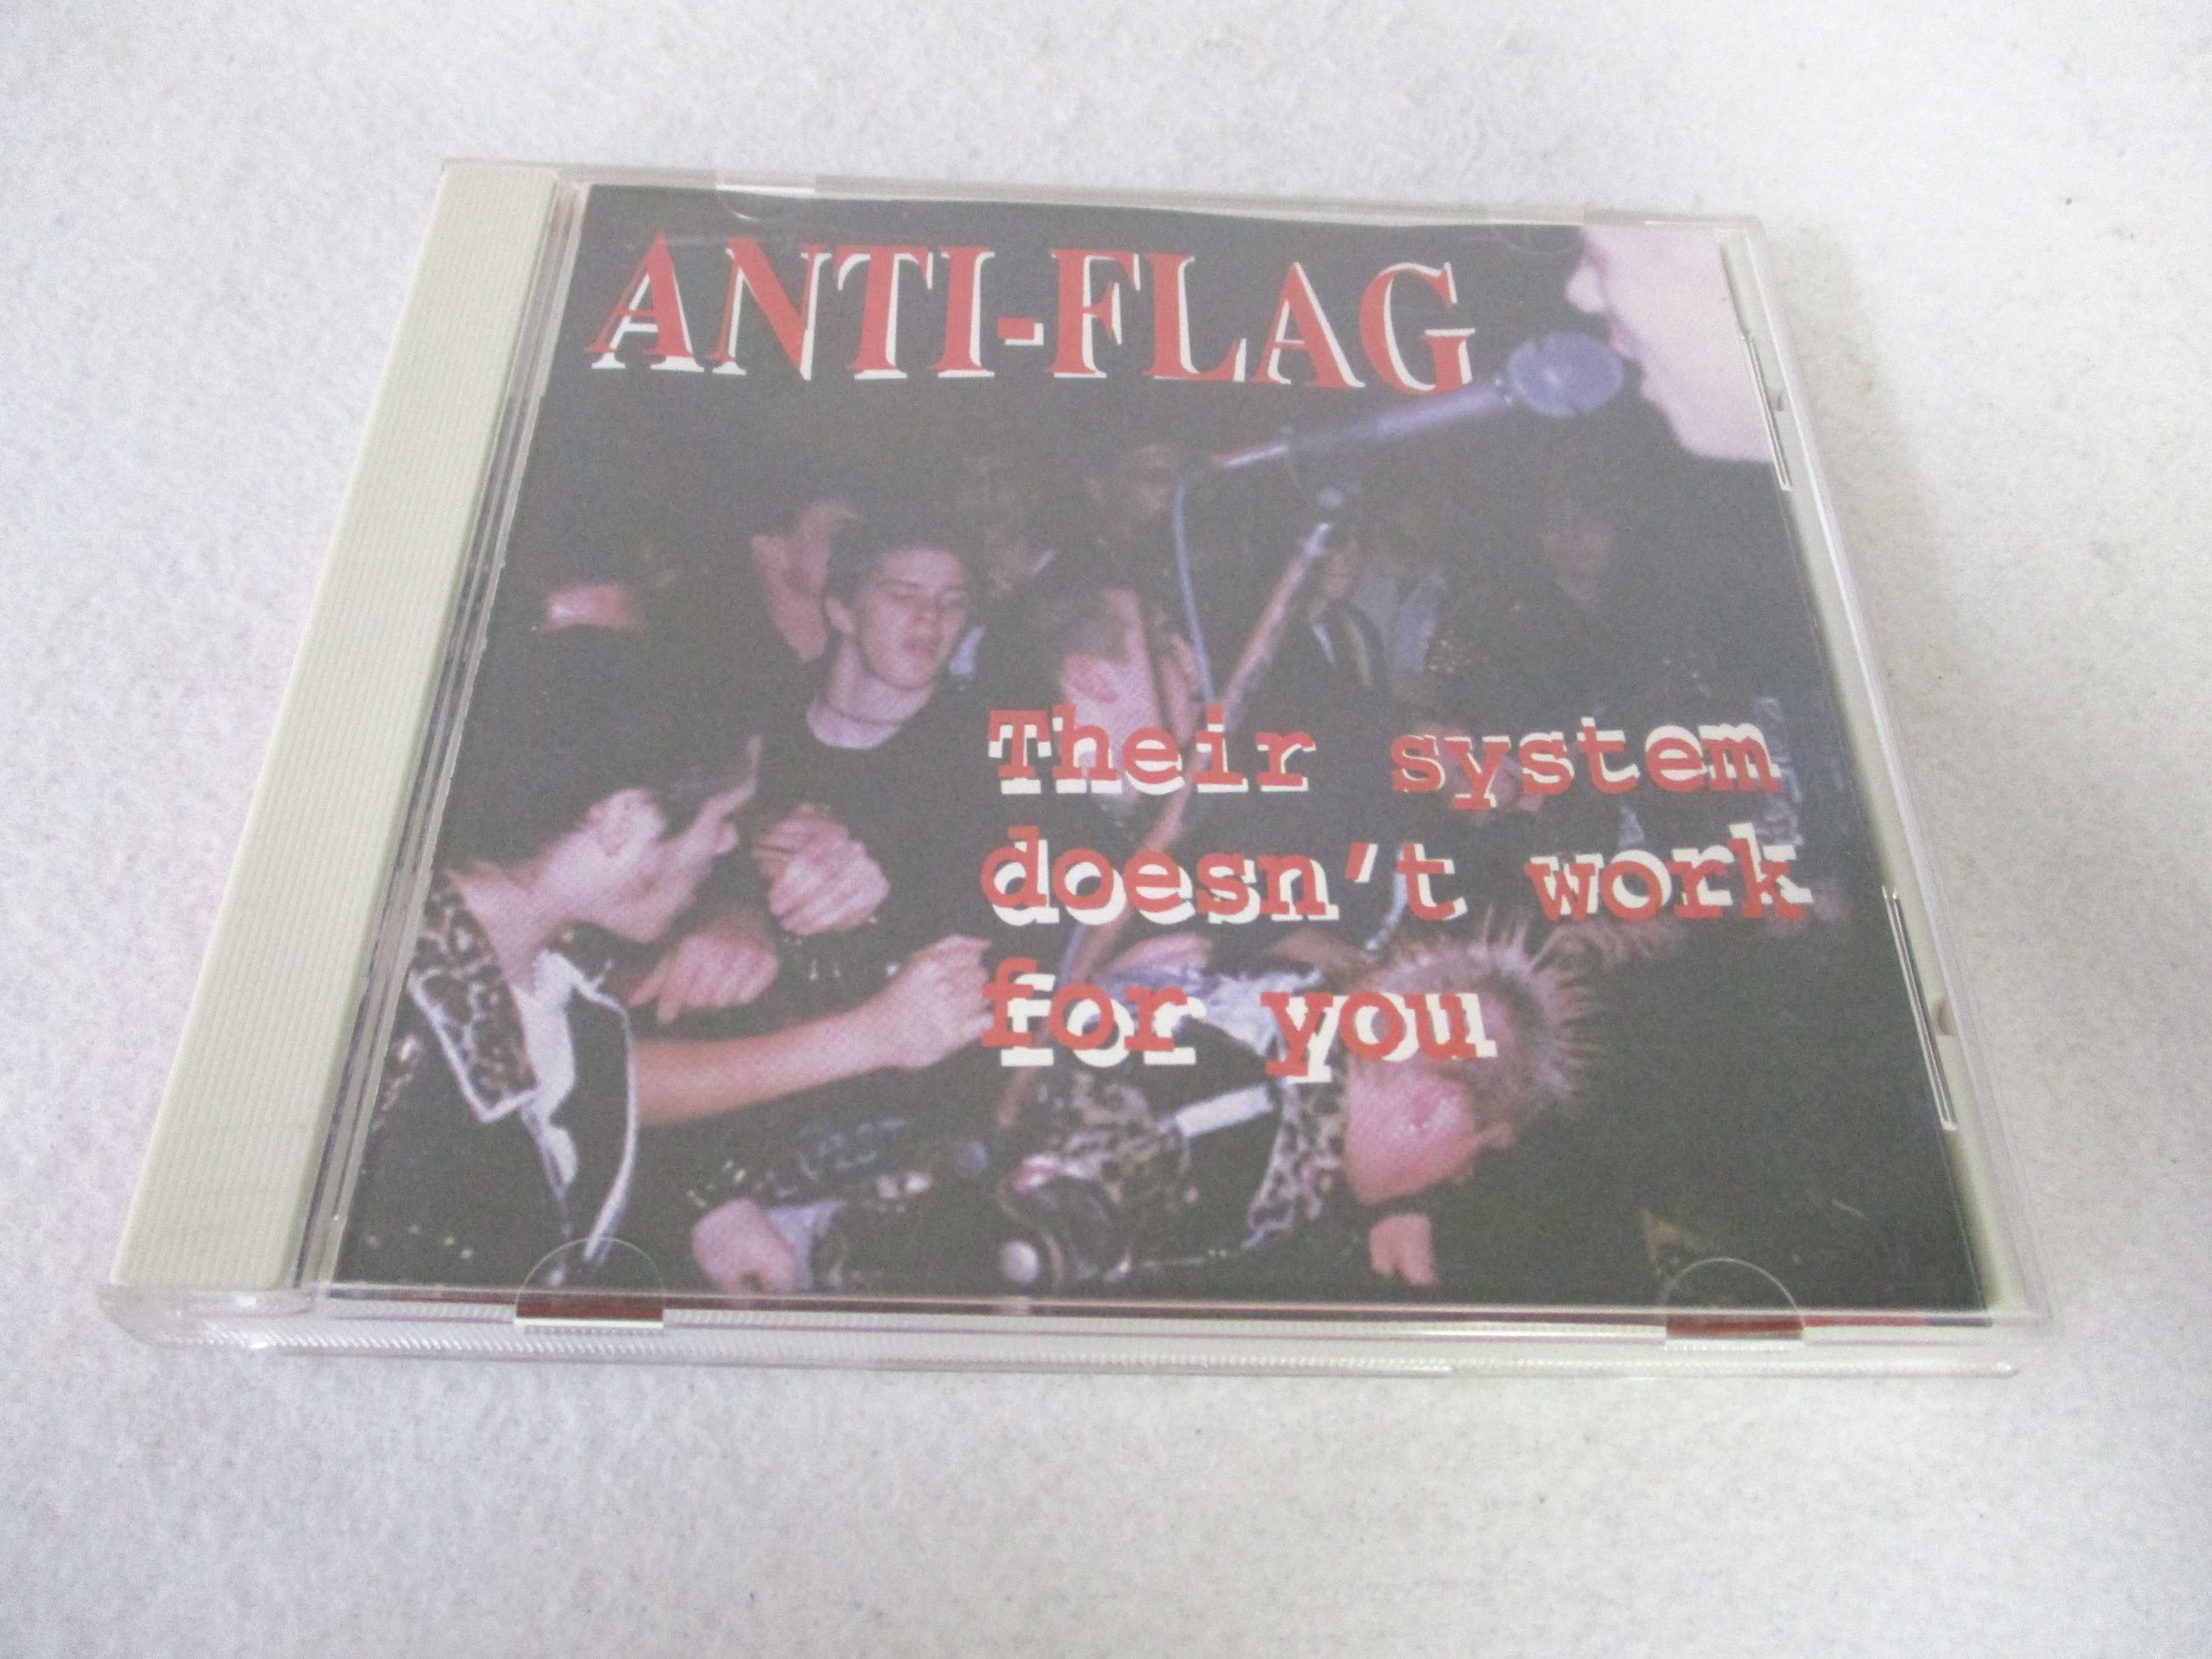 AC05838 【中古】 【CD】 Their System Doesn’t Work For You/Anti-Flag